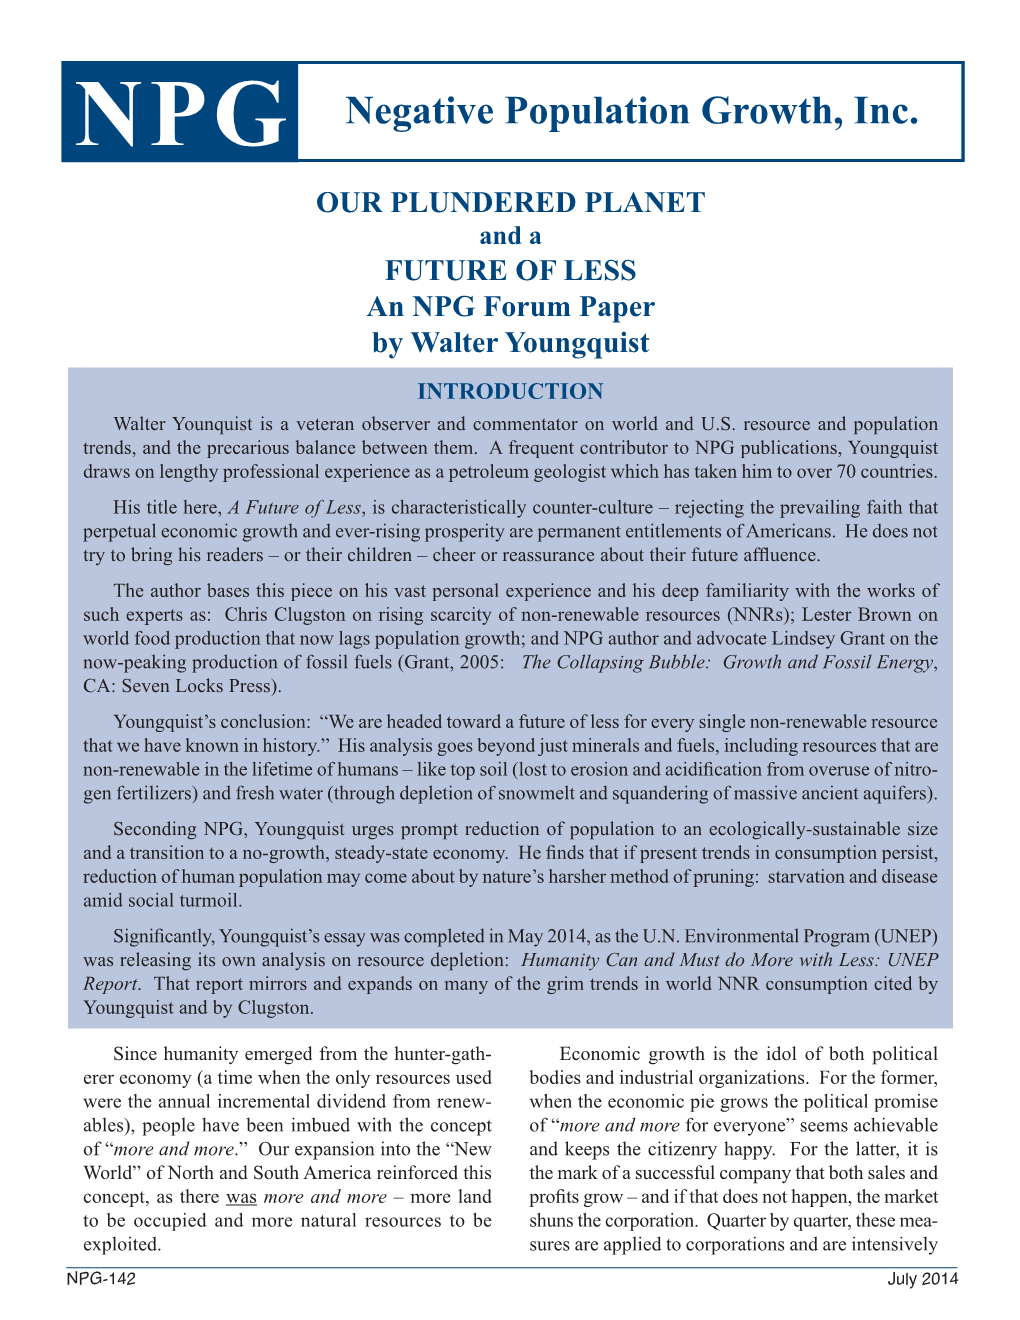 OUR PLUNDERED PLANET and a FUTURE of LESS an NPG Forum Paper by Walter Youngquist INTRODUCTION Walter Younquist Is a Veteran Observer and Commentator on World and U.S